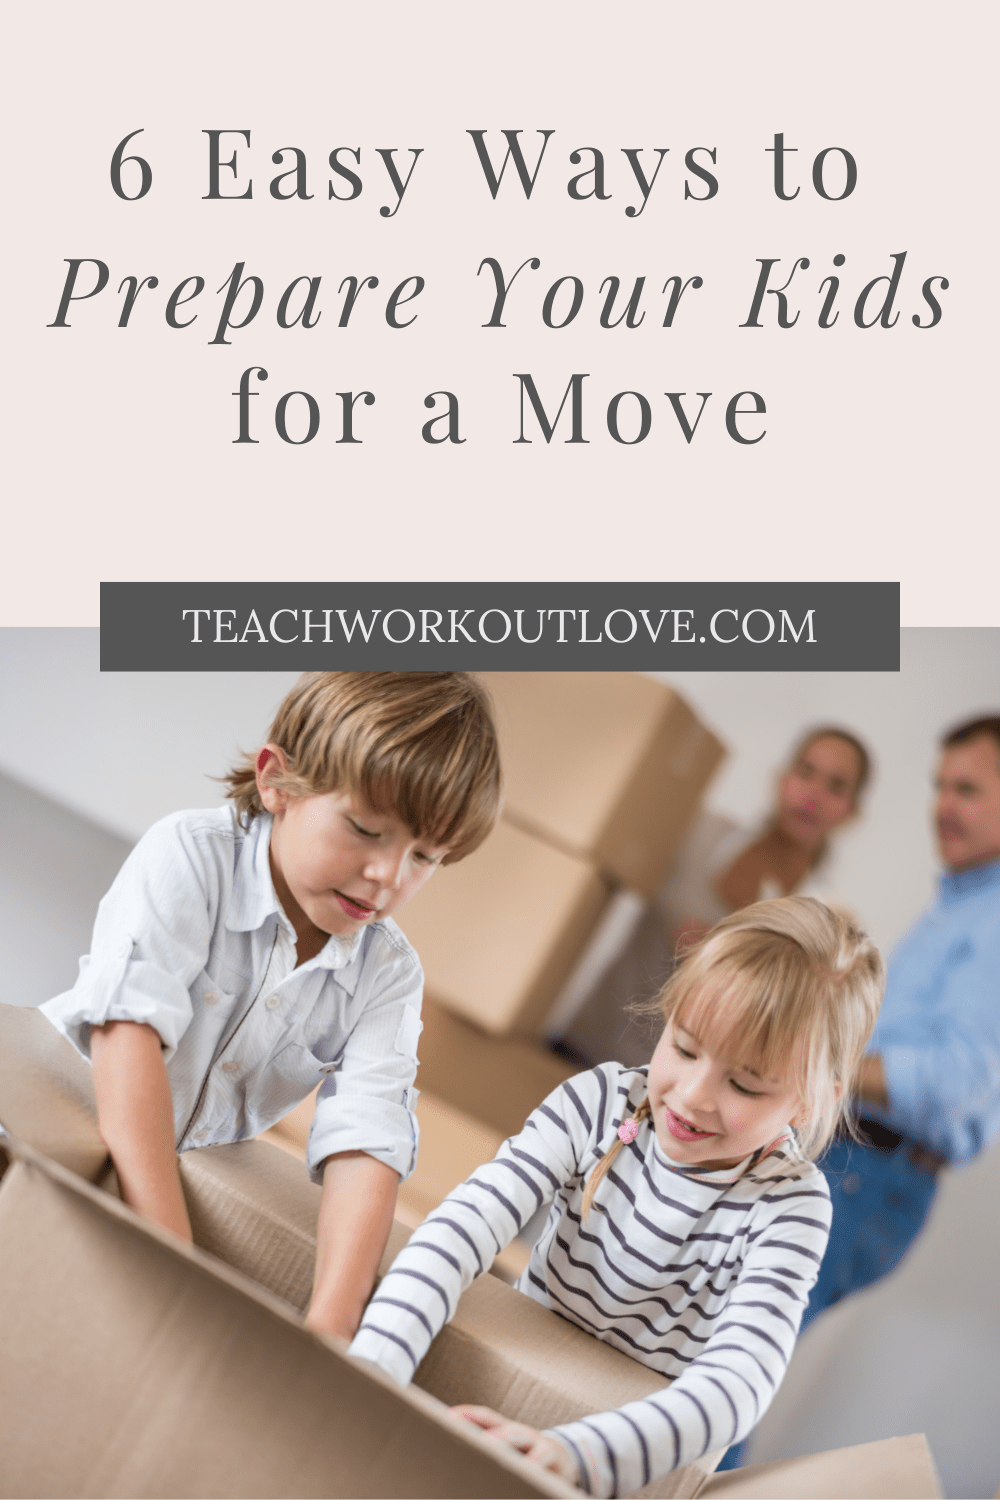 Learn from experts about how to prepare your kids for move including activity ideas and tips to help from start to finish.